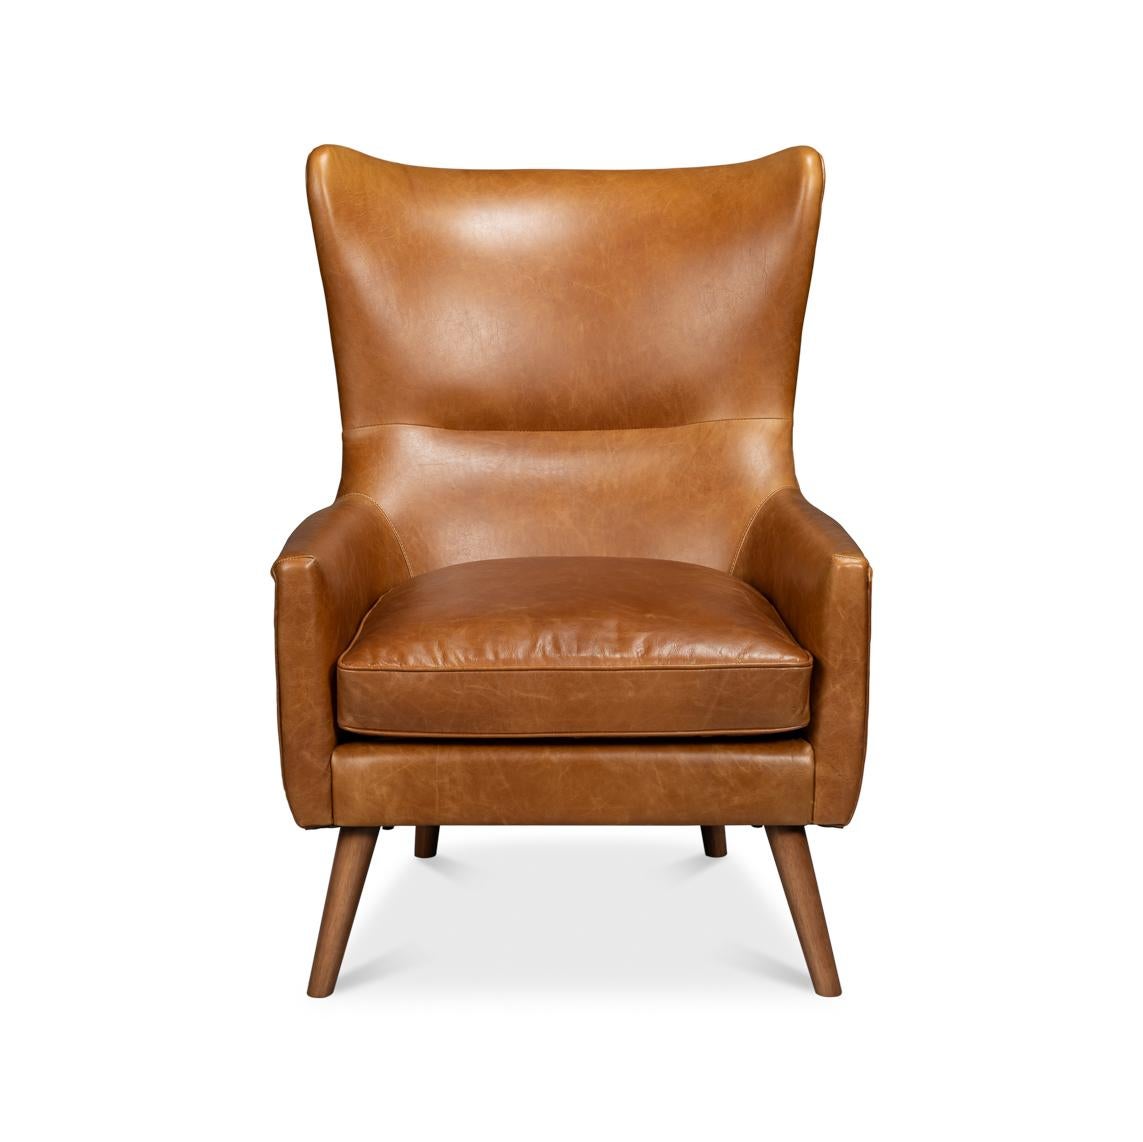 A seamless blend of classic design and modern comfort. Crafted with sumptuous, caramel-colored Cuba Brown leather, this chair exudes a rich, inviting vibe that beckons you to sit and stay awhile.

The elegant wingback silhouette is both supportive